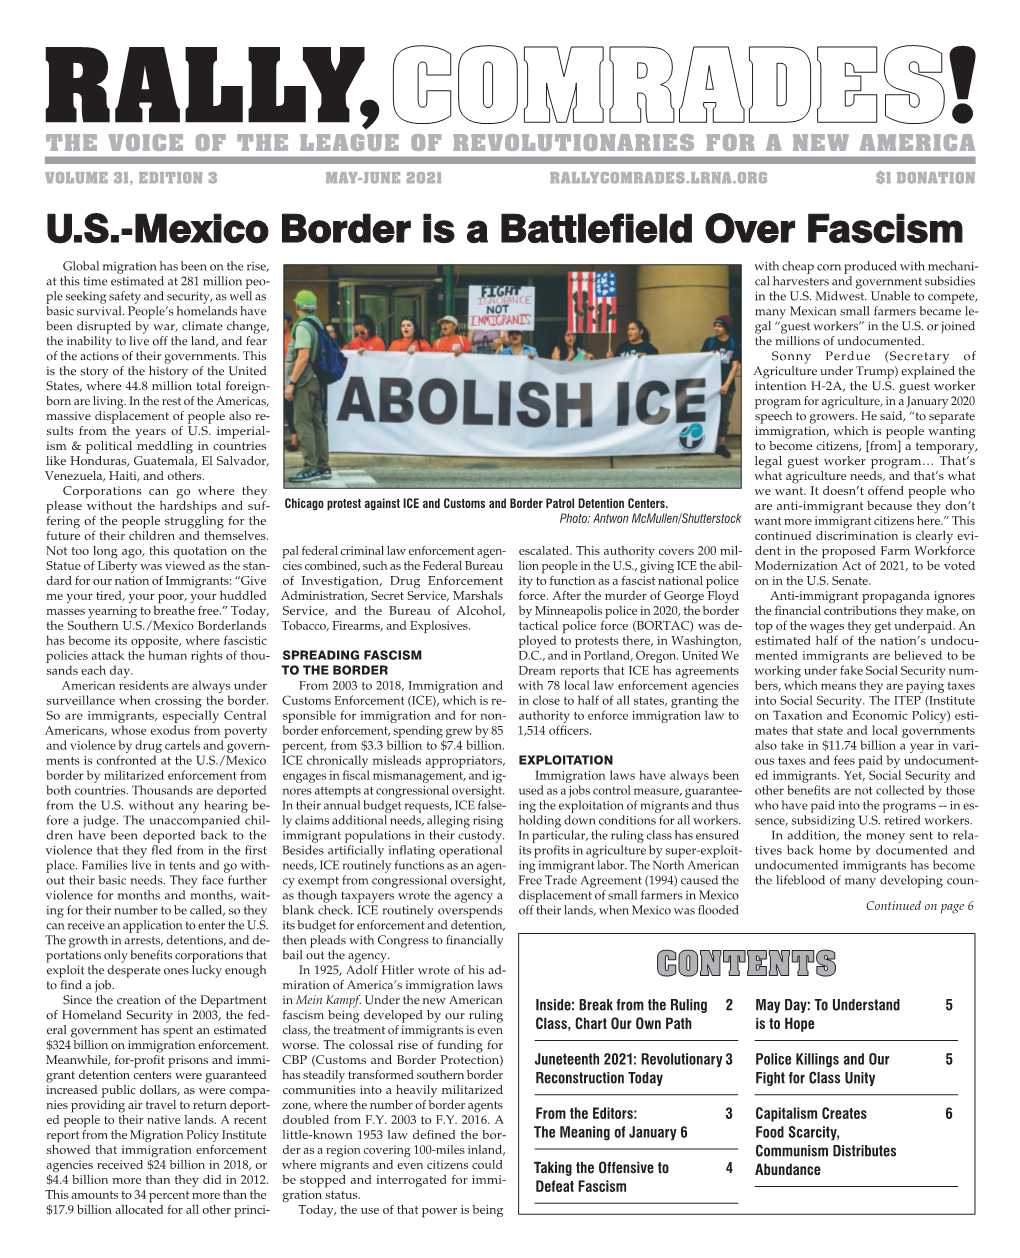 U.S.-Mexico Border Is a Battlefield Over Fascism